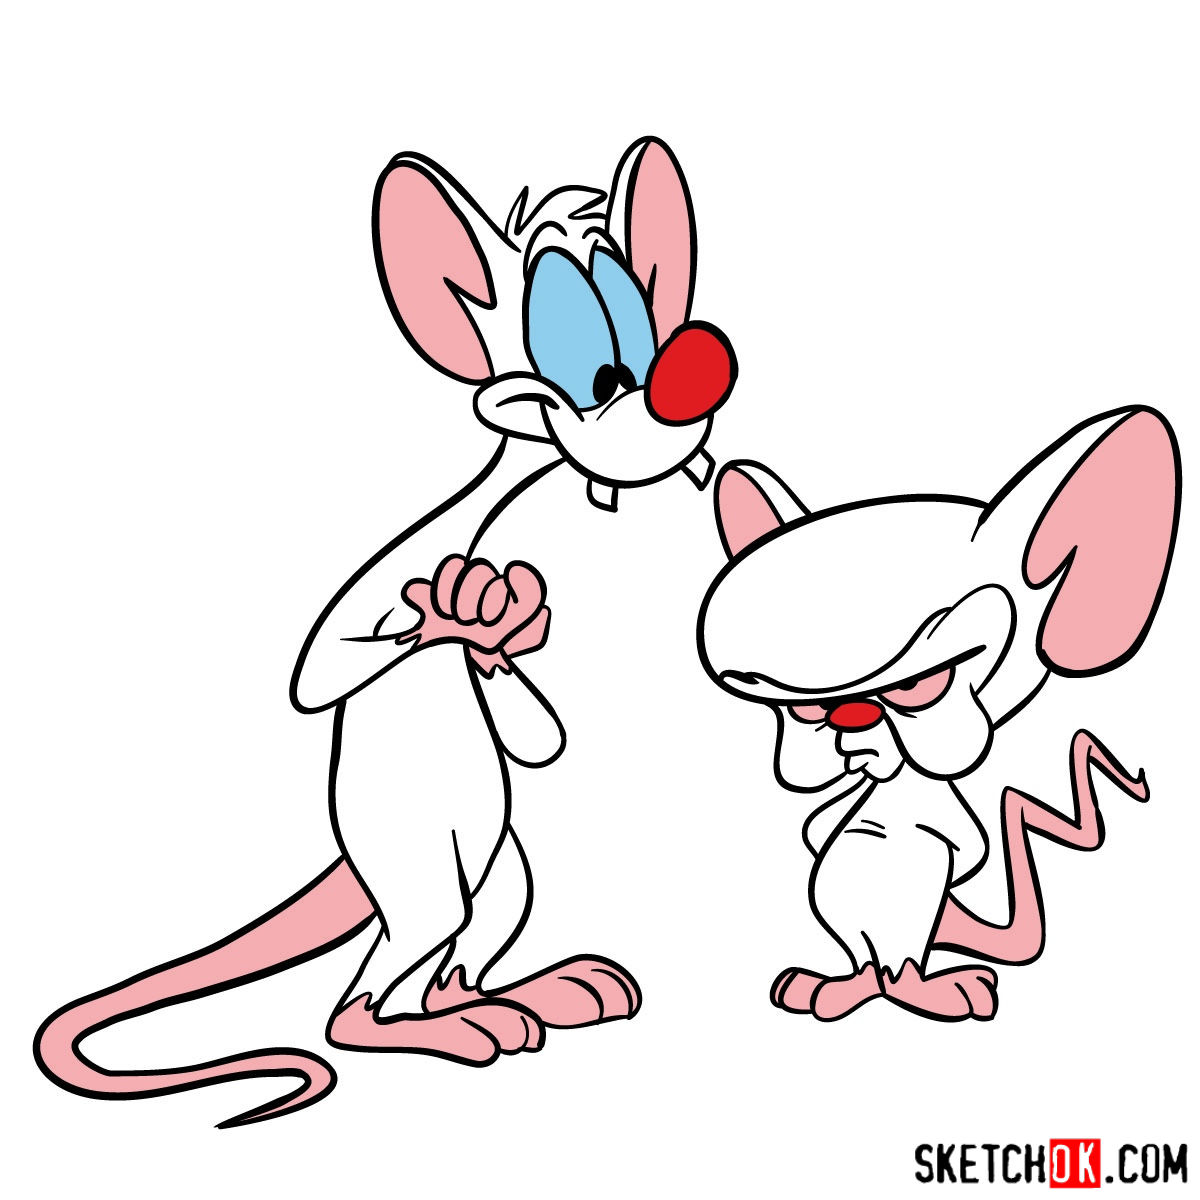 How to draw Pinky and the Brain together - Sketchok easy drawing guides